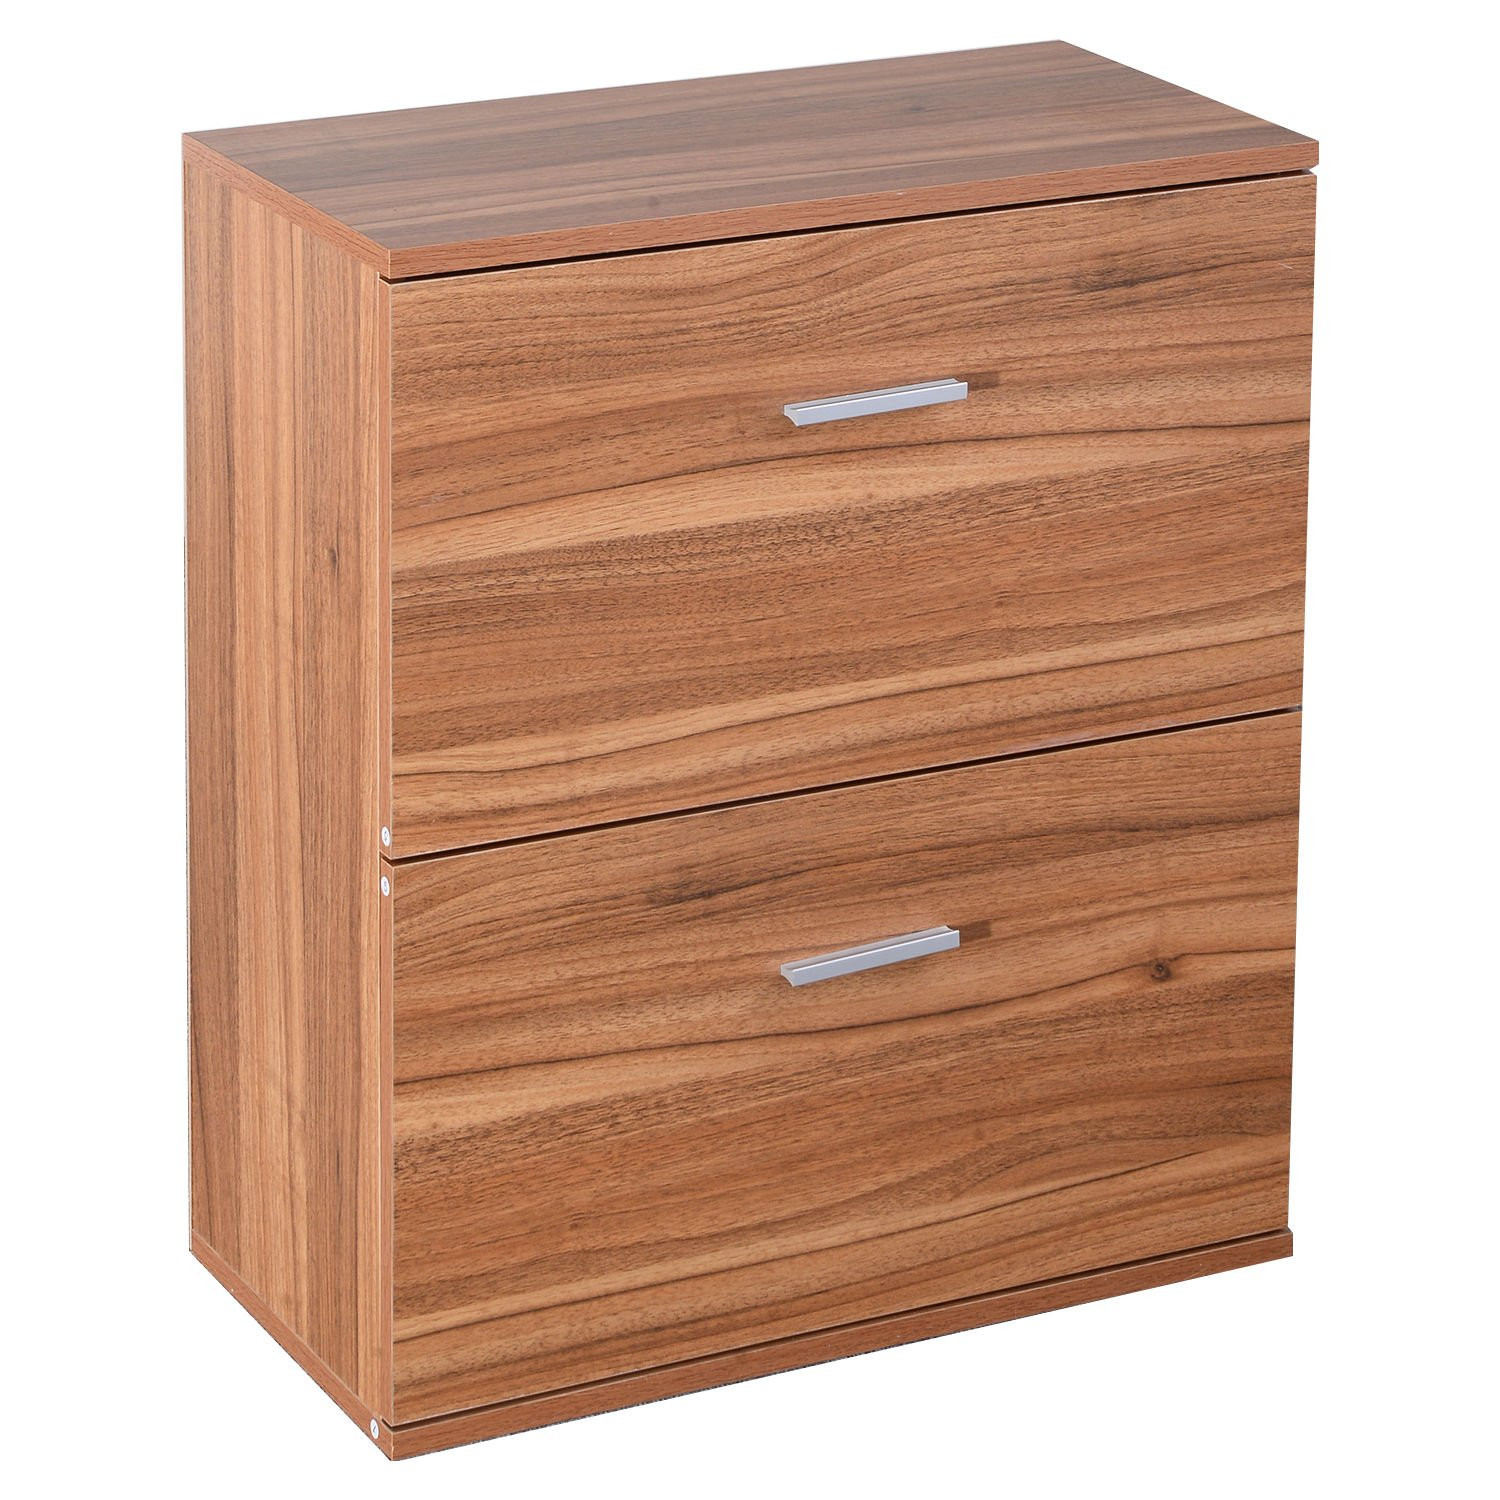 Storage Cabinet For Bedrooms
 New Wooden 2 Drawer Chest Dresser Clothes Storage Bedroom